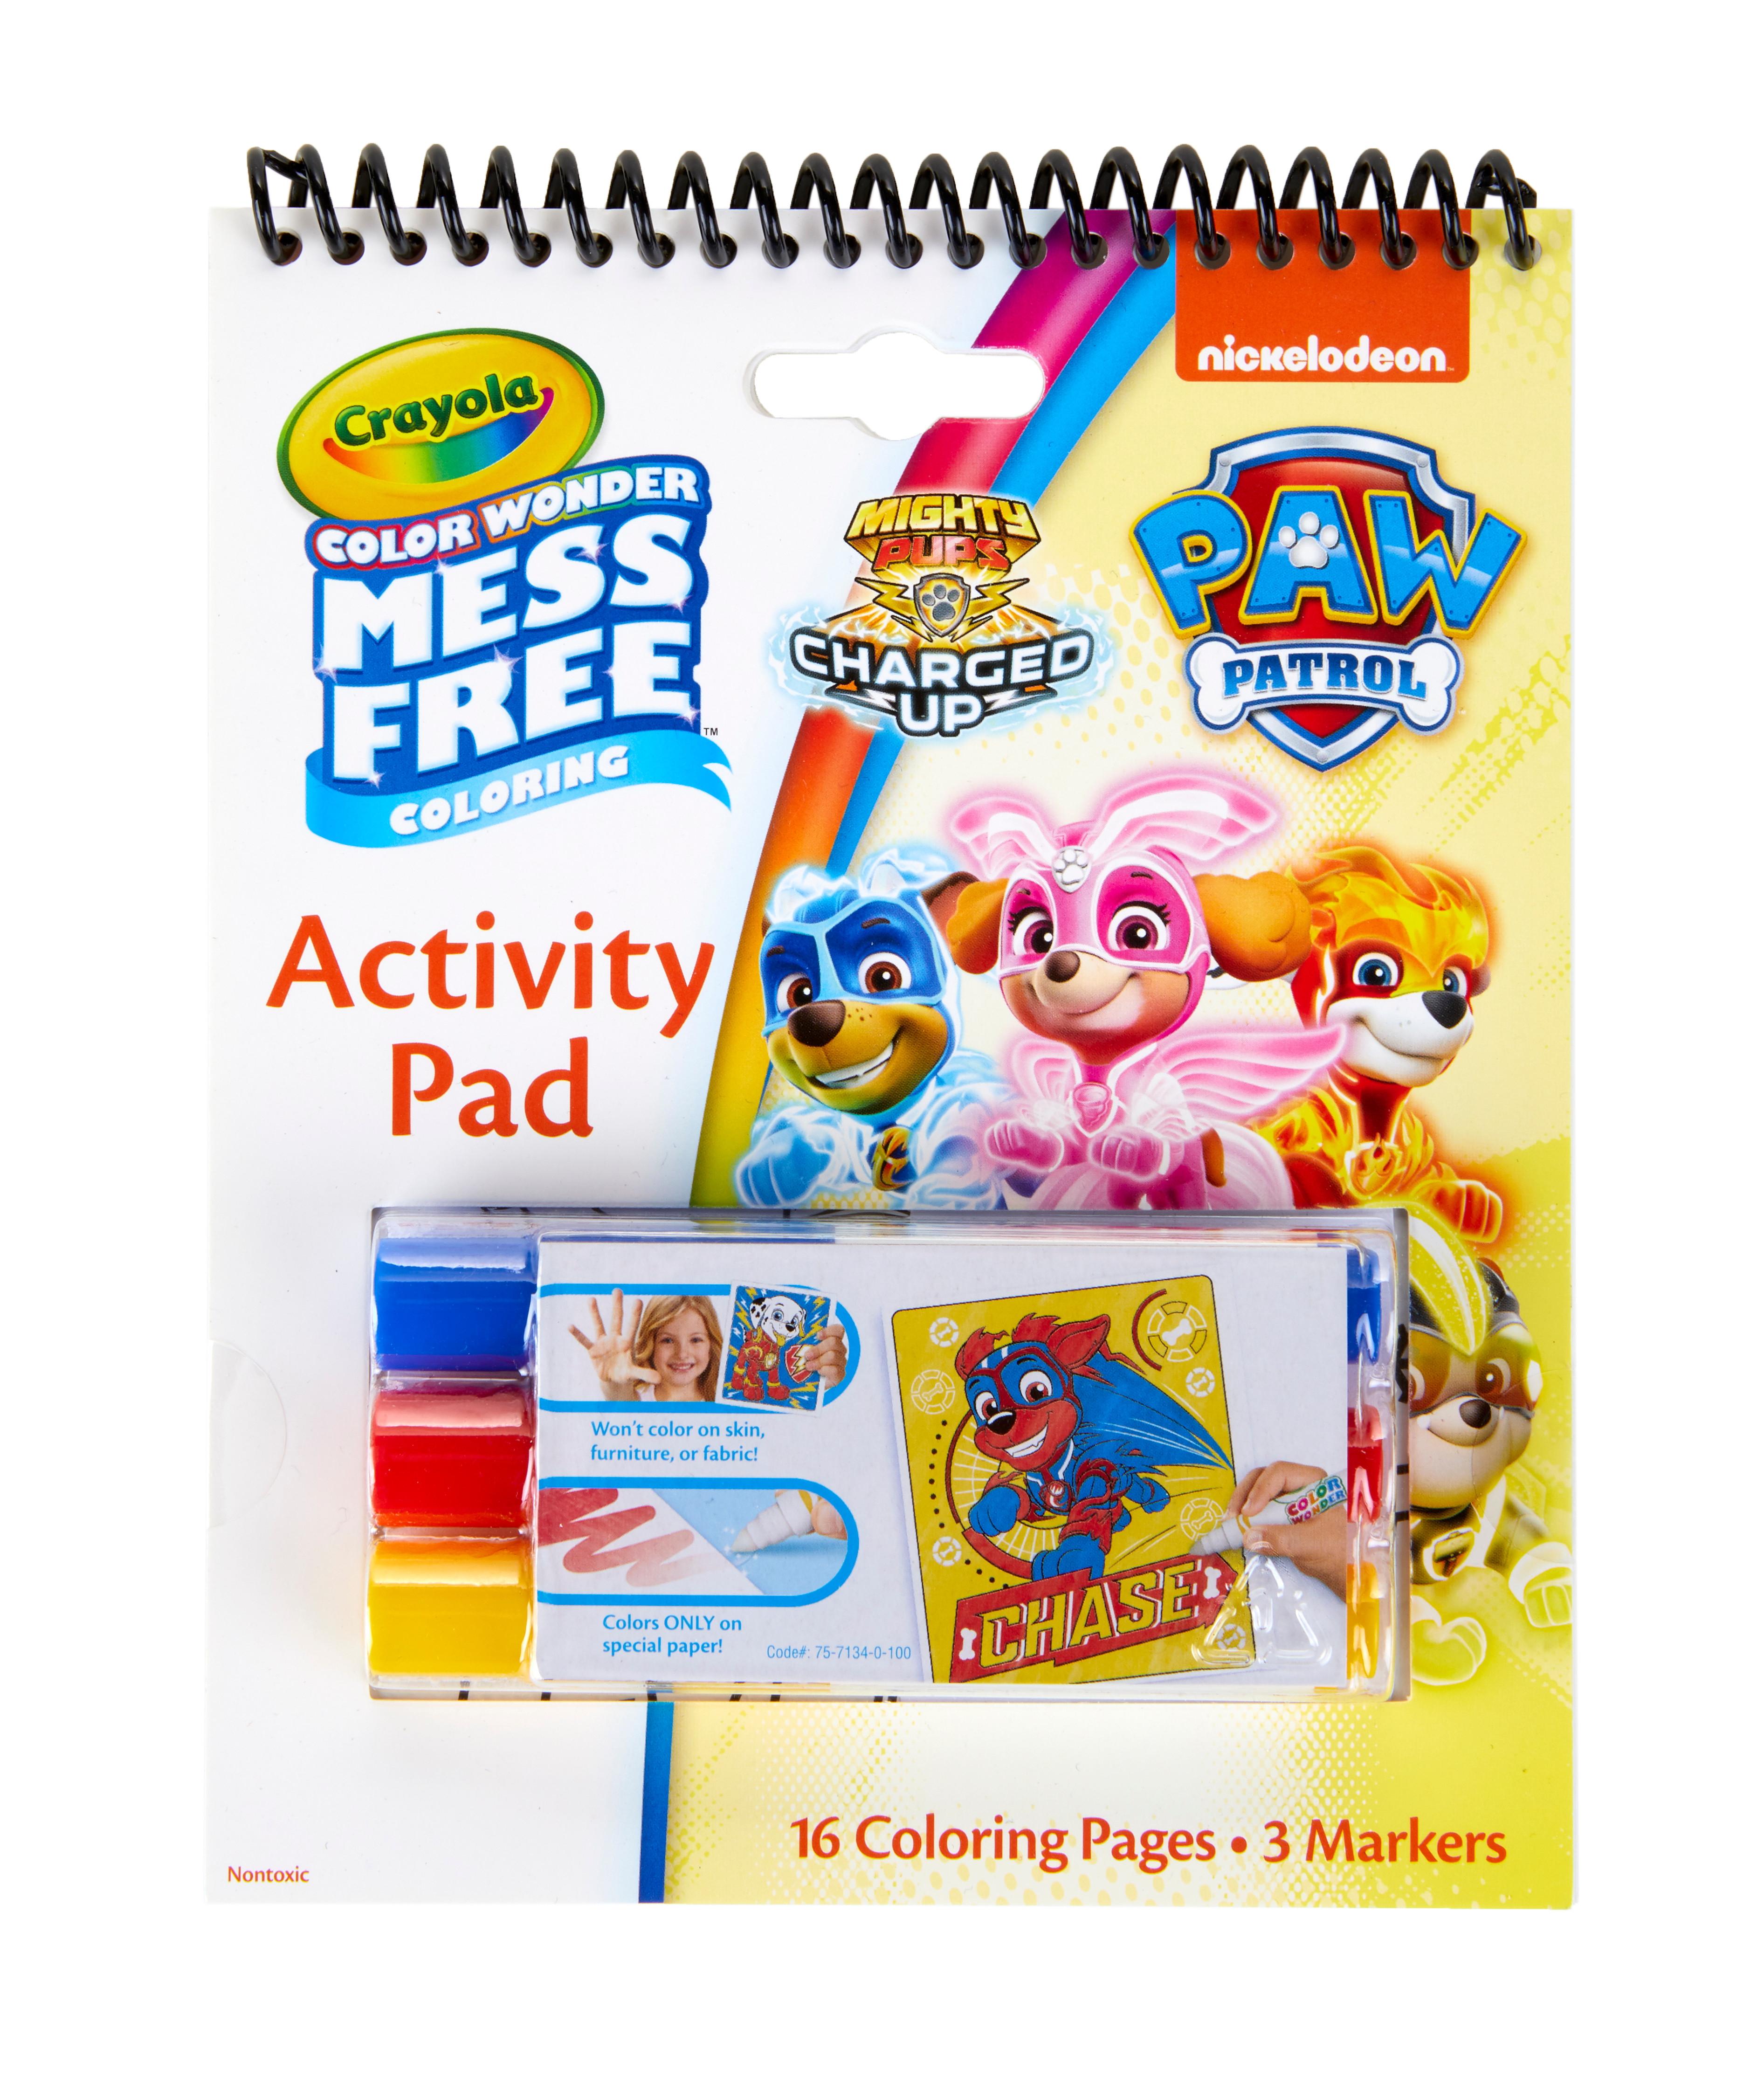 Crayola Color Wonder Paw Patrol Coloring Book & Activity Pad, 16 Pages, Unisex Child - image 1 of 7